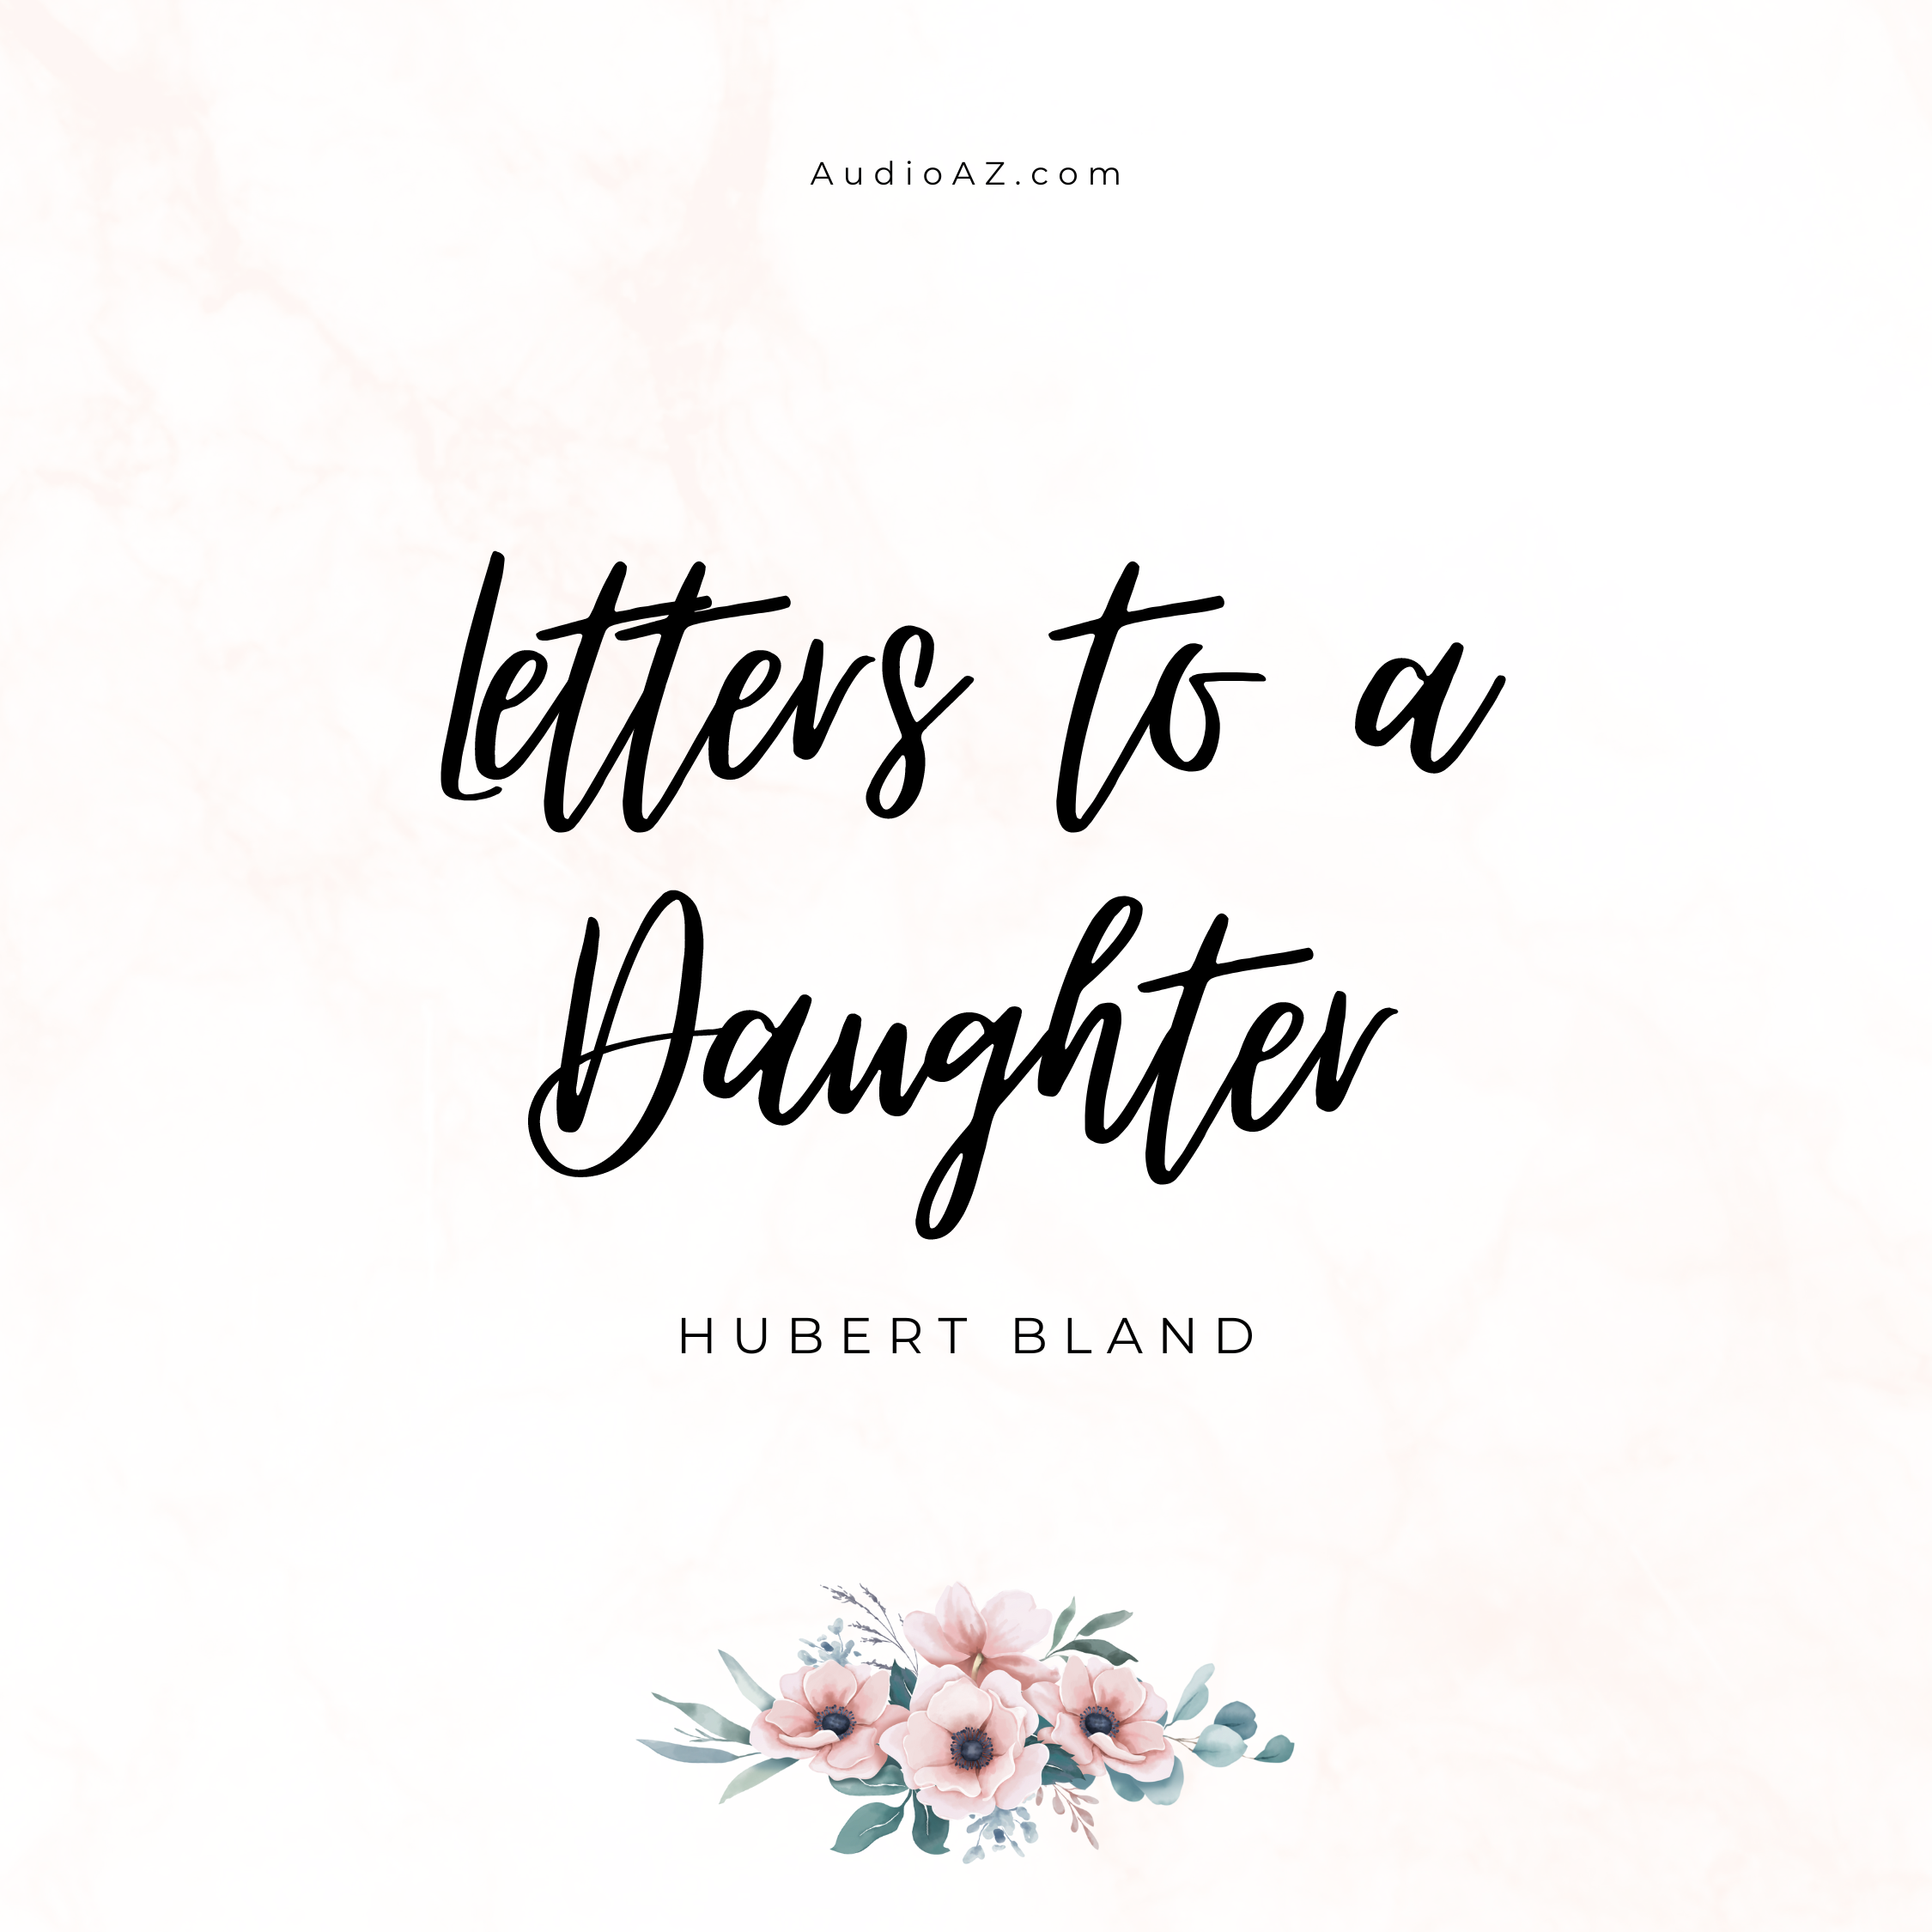 Letters to a Daughter cover